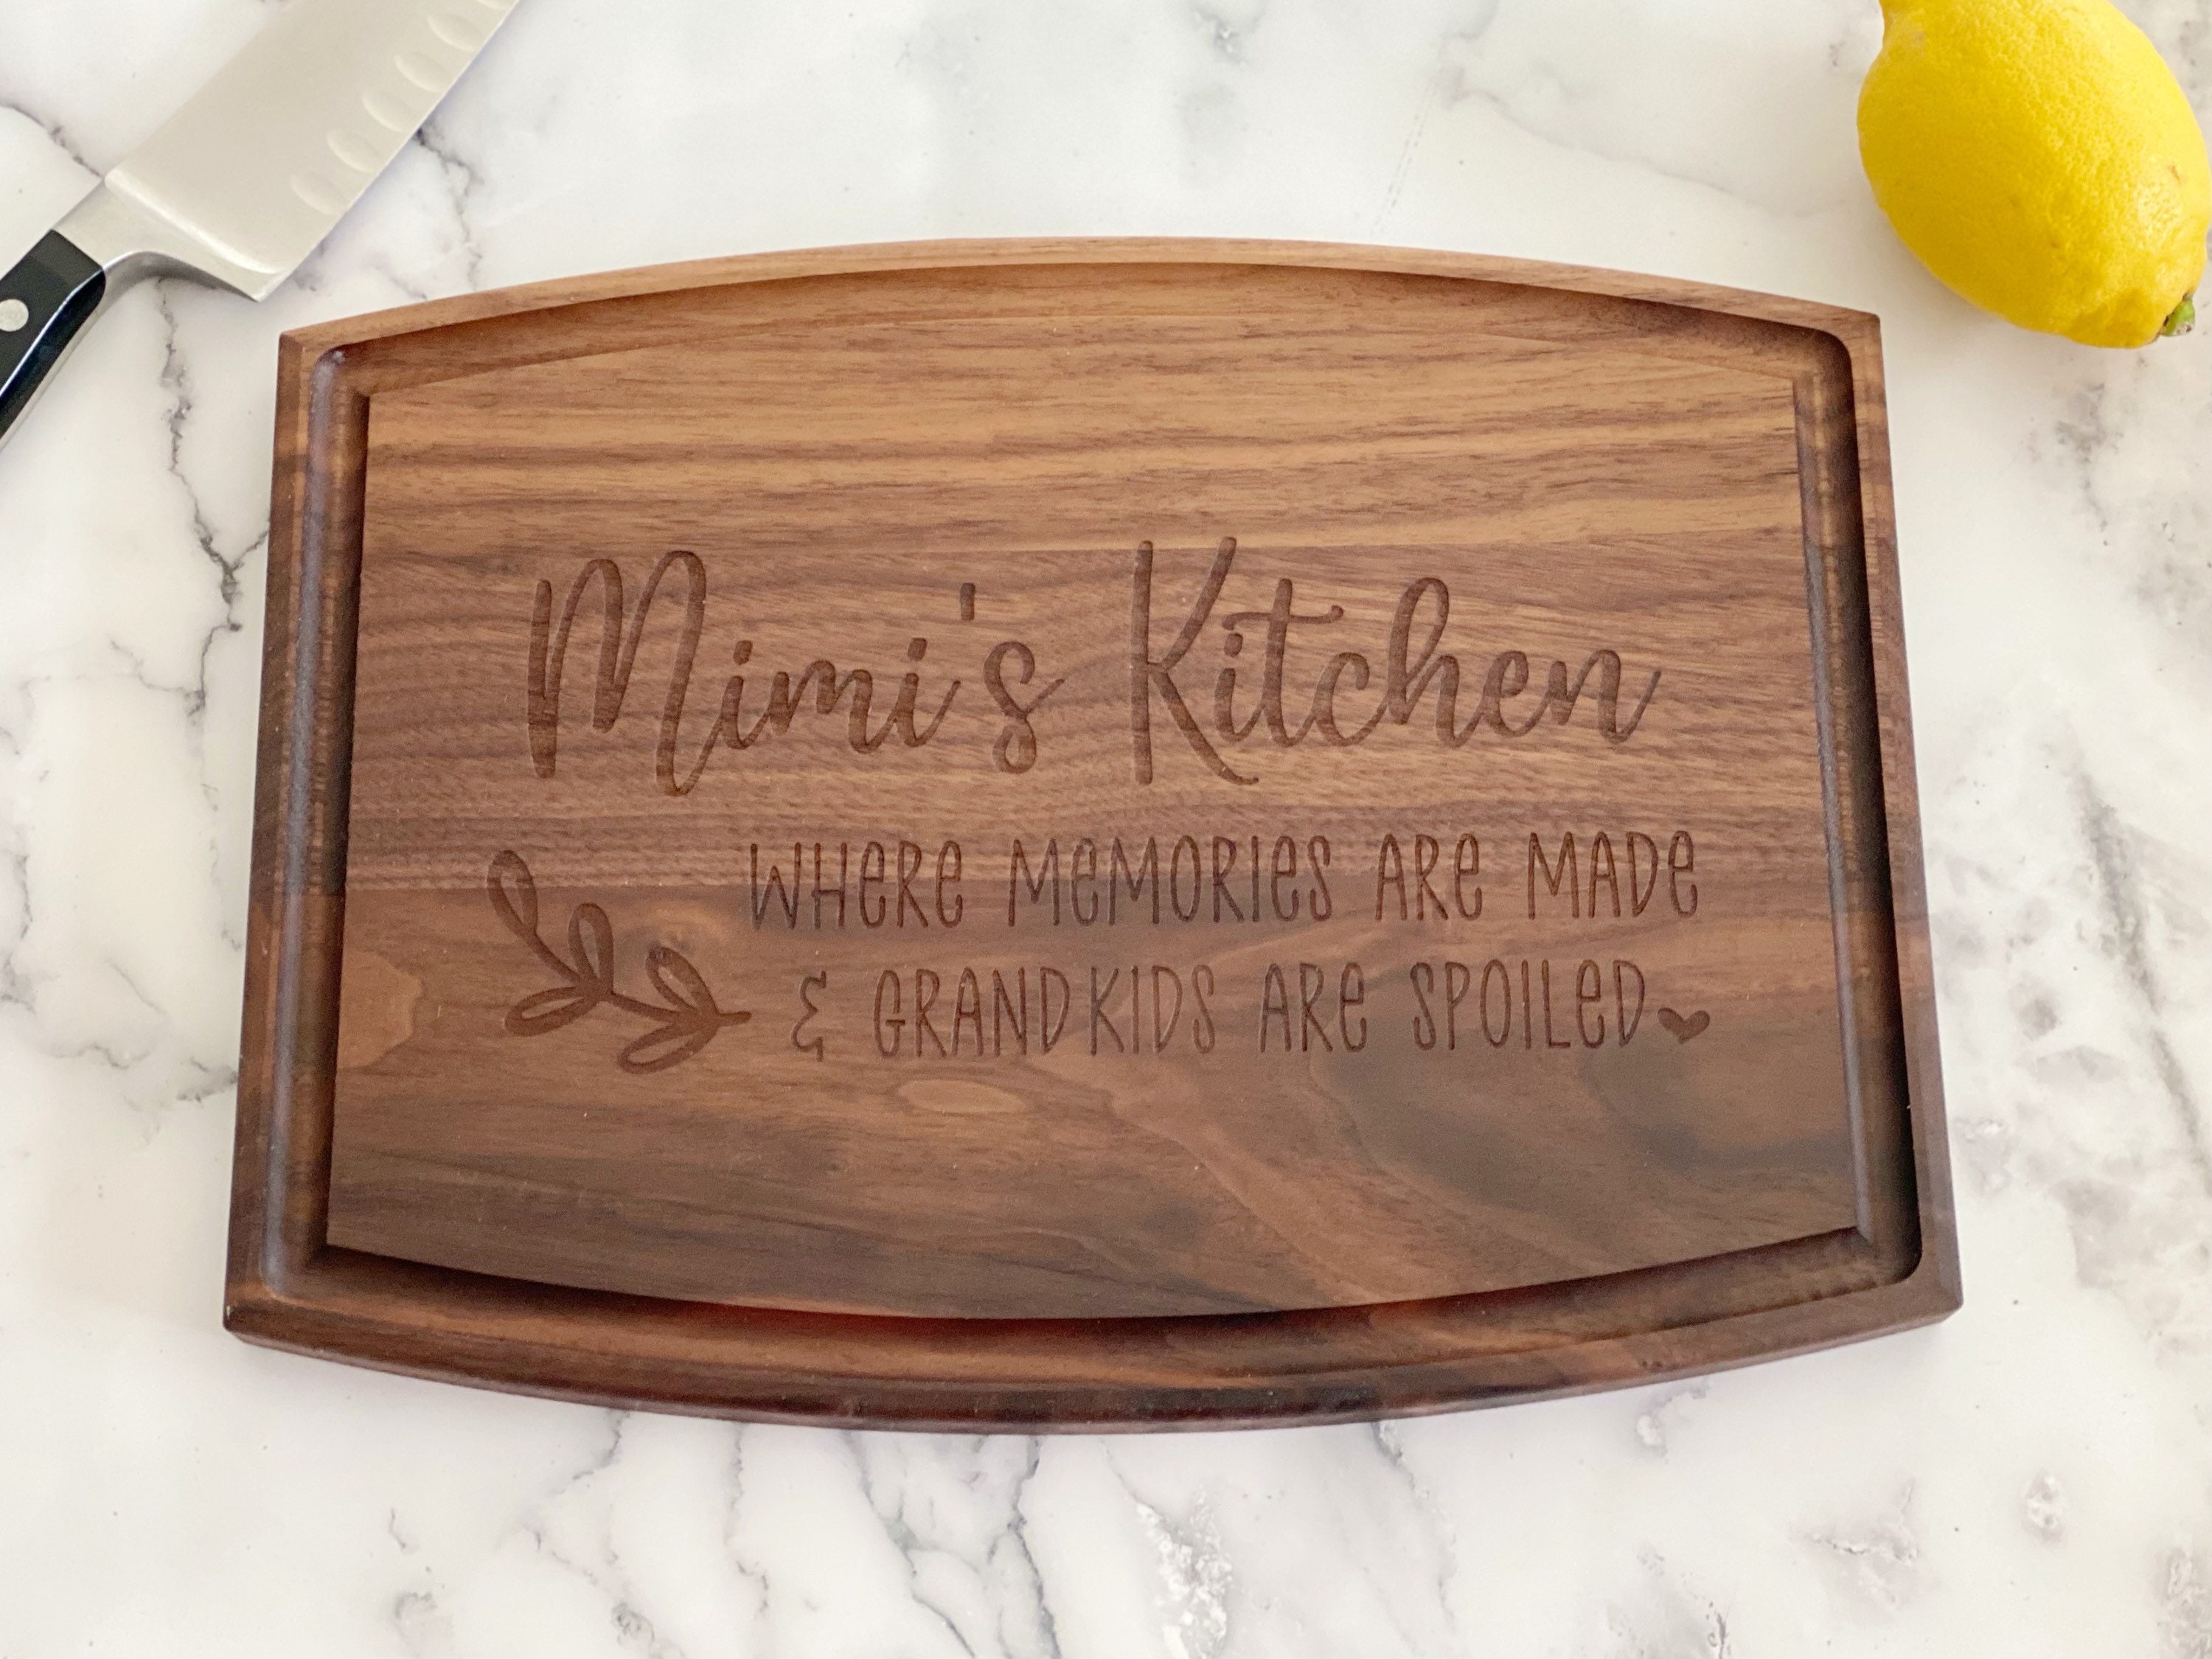 Mimi's Kitchen Engraved Cutting Board